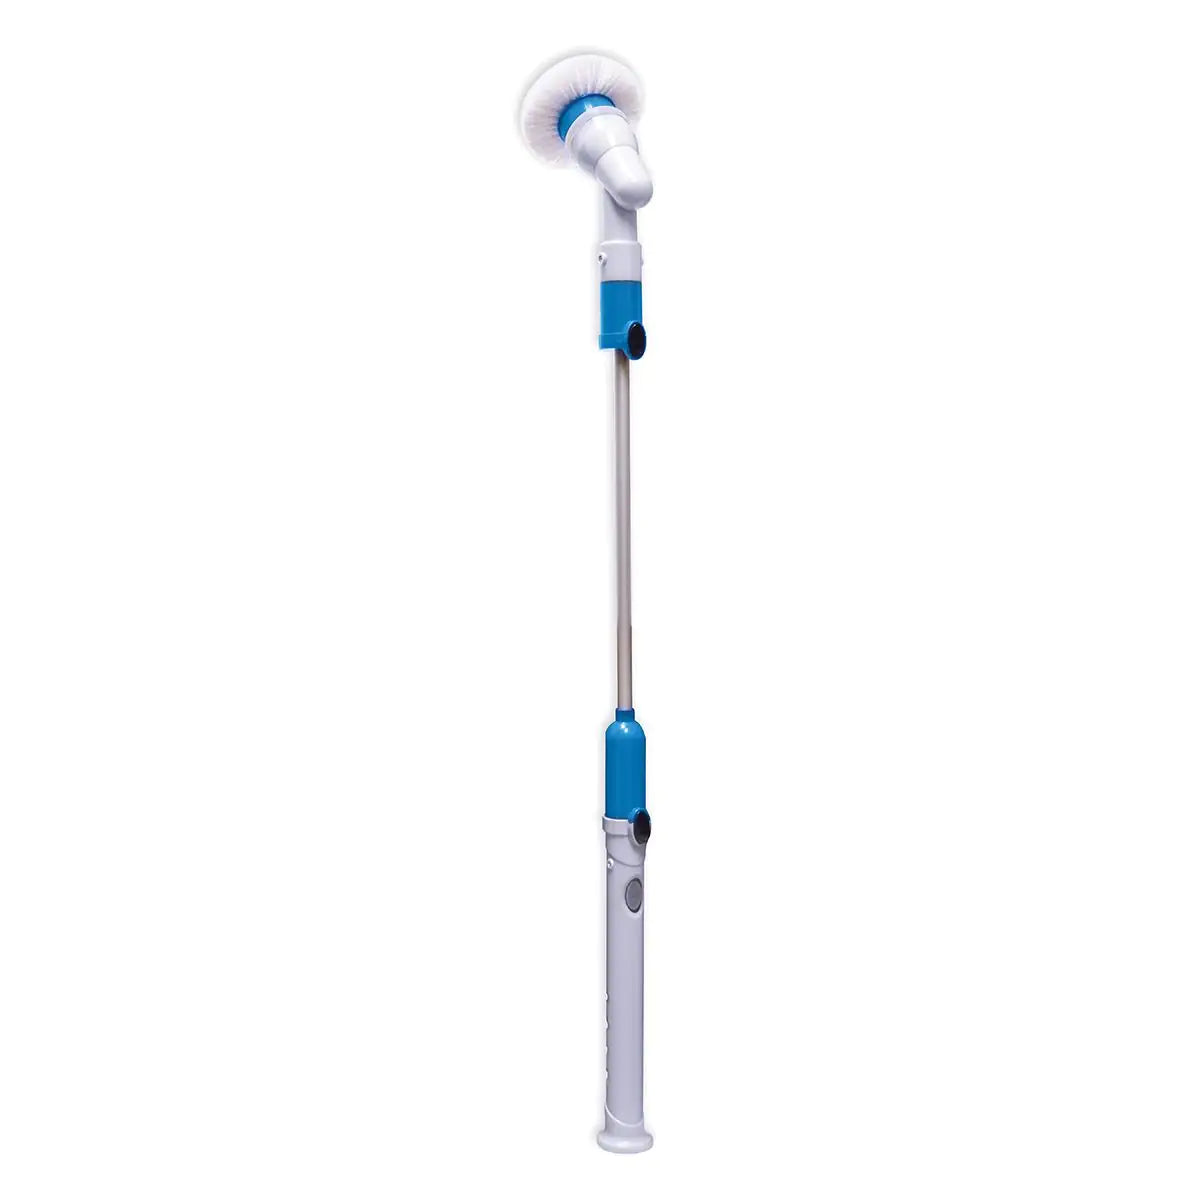 JML Hurricane Spin Scrubber The Reach Anywhere Cordless Electric Scrubber - White & Blue | V0827 from JML - DID Electrical